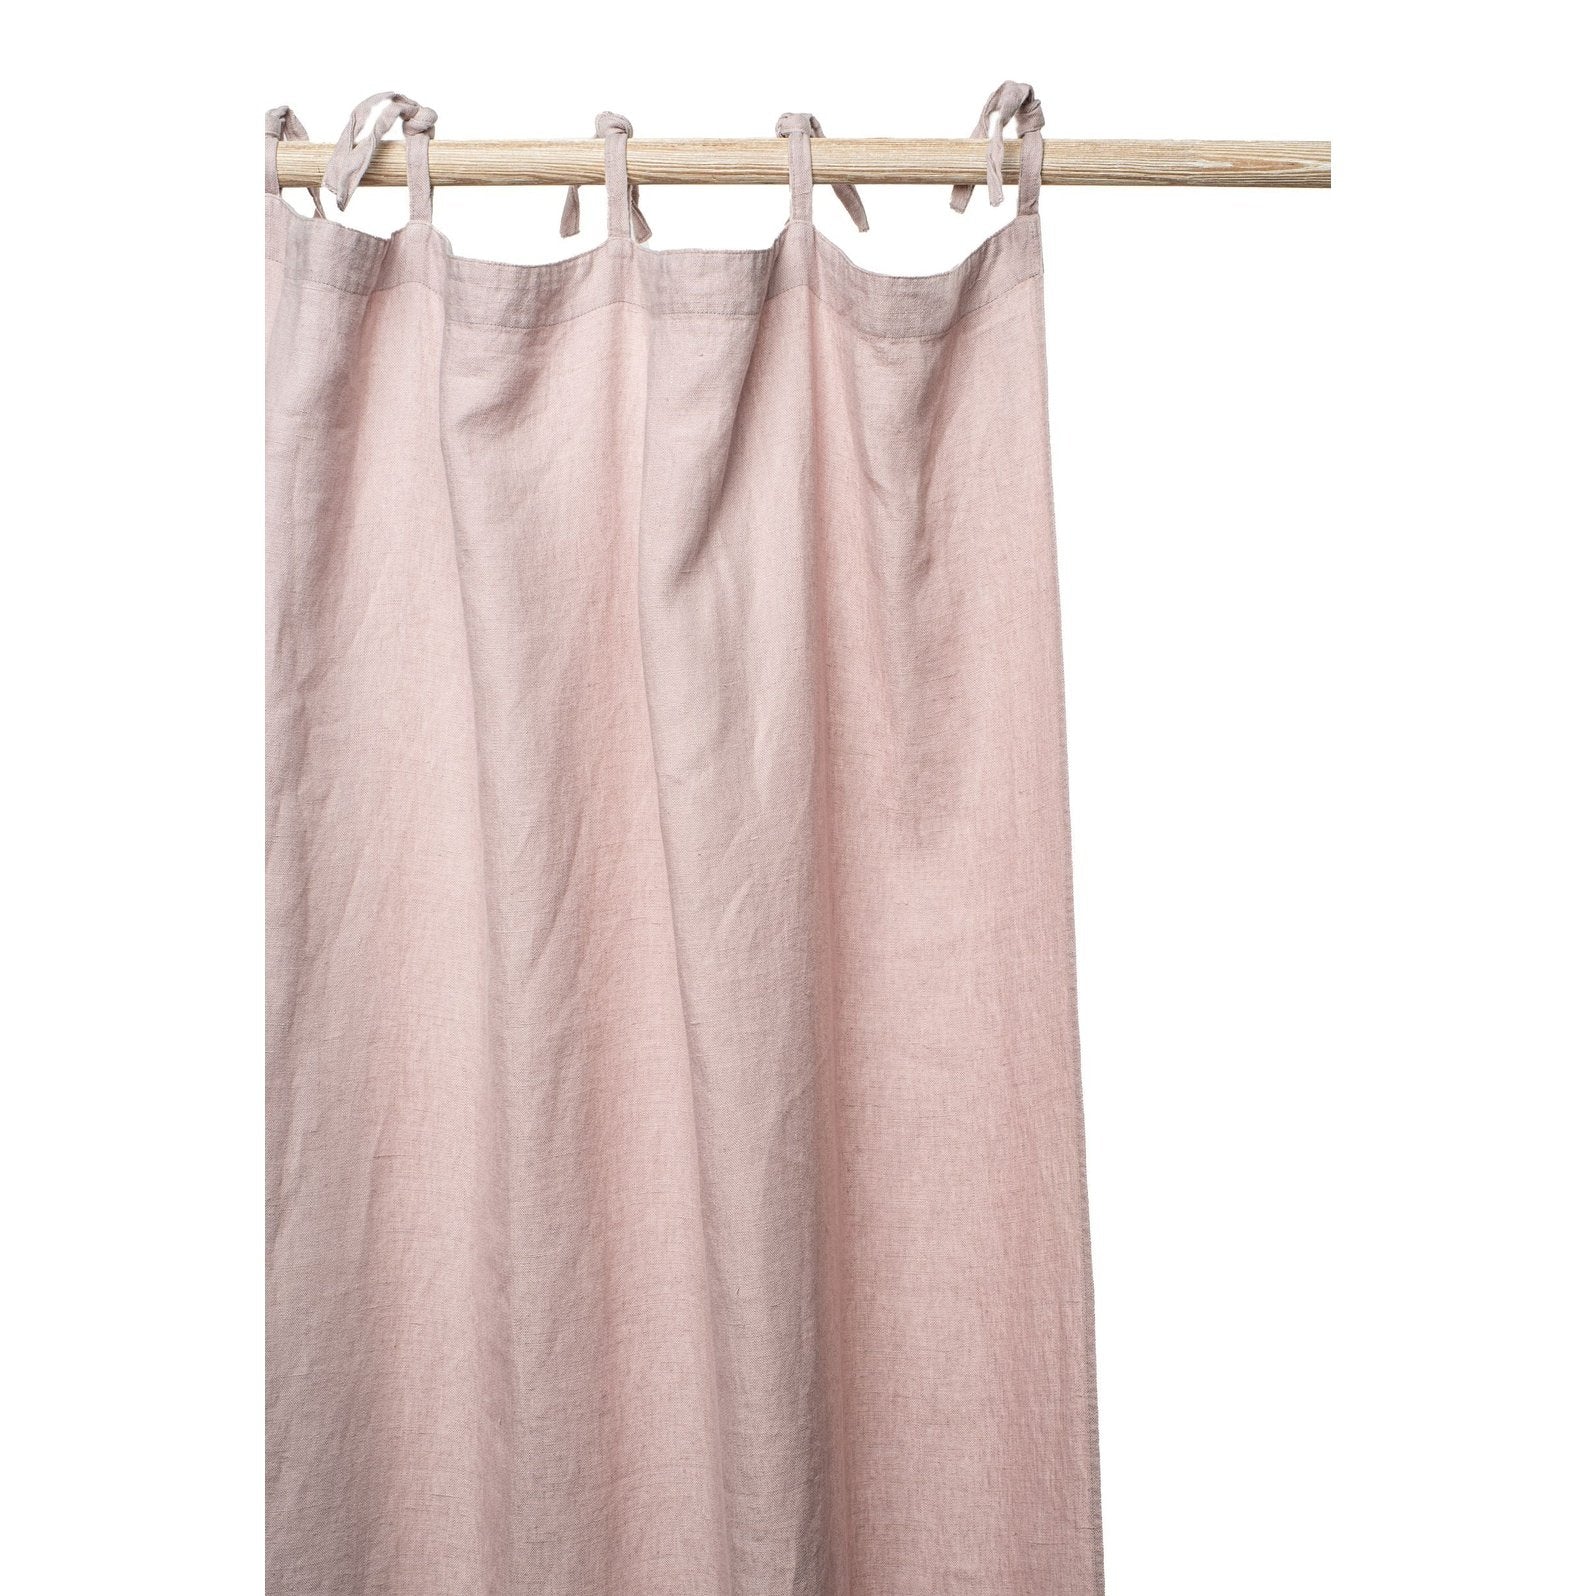 Drape your windows in timeless elegance with the Emma Vieuw Rose Linen Curtain (160x280cm).